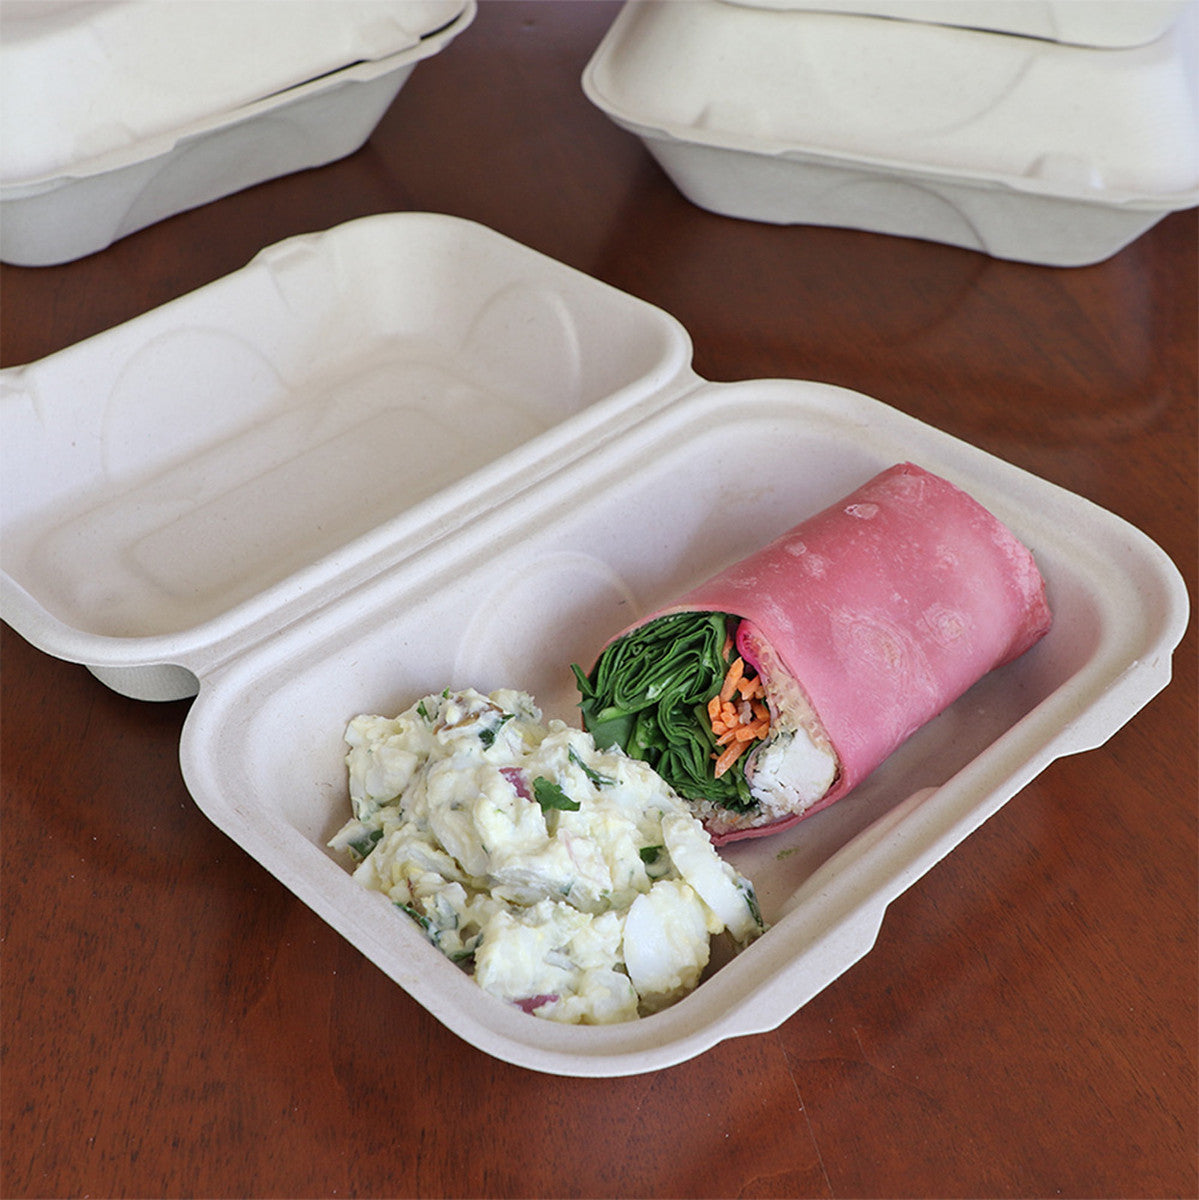 9" x 6" x 3" Hoagie Clamshell One Compartment | Natural Plant Fiber | 500/case - World Centric